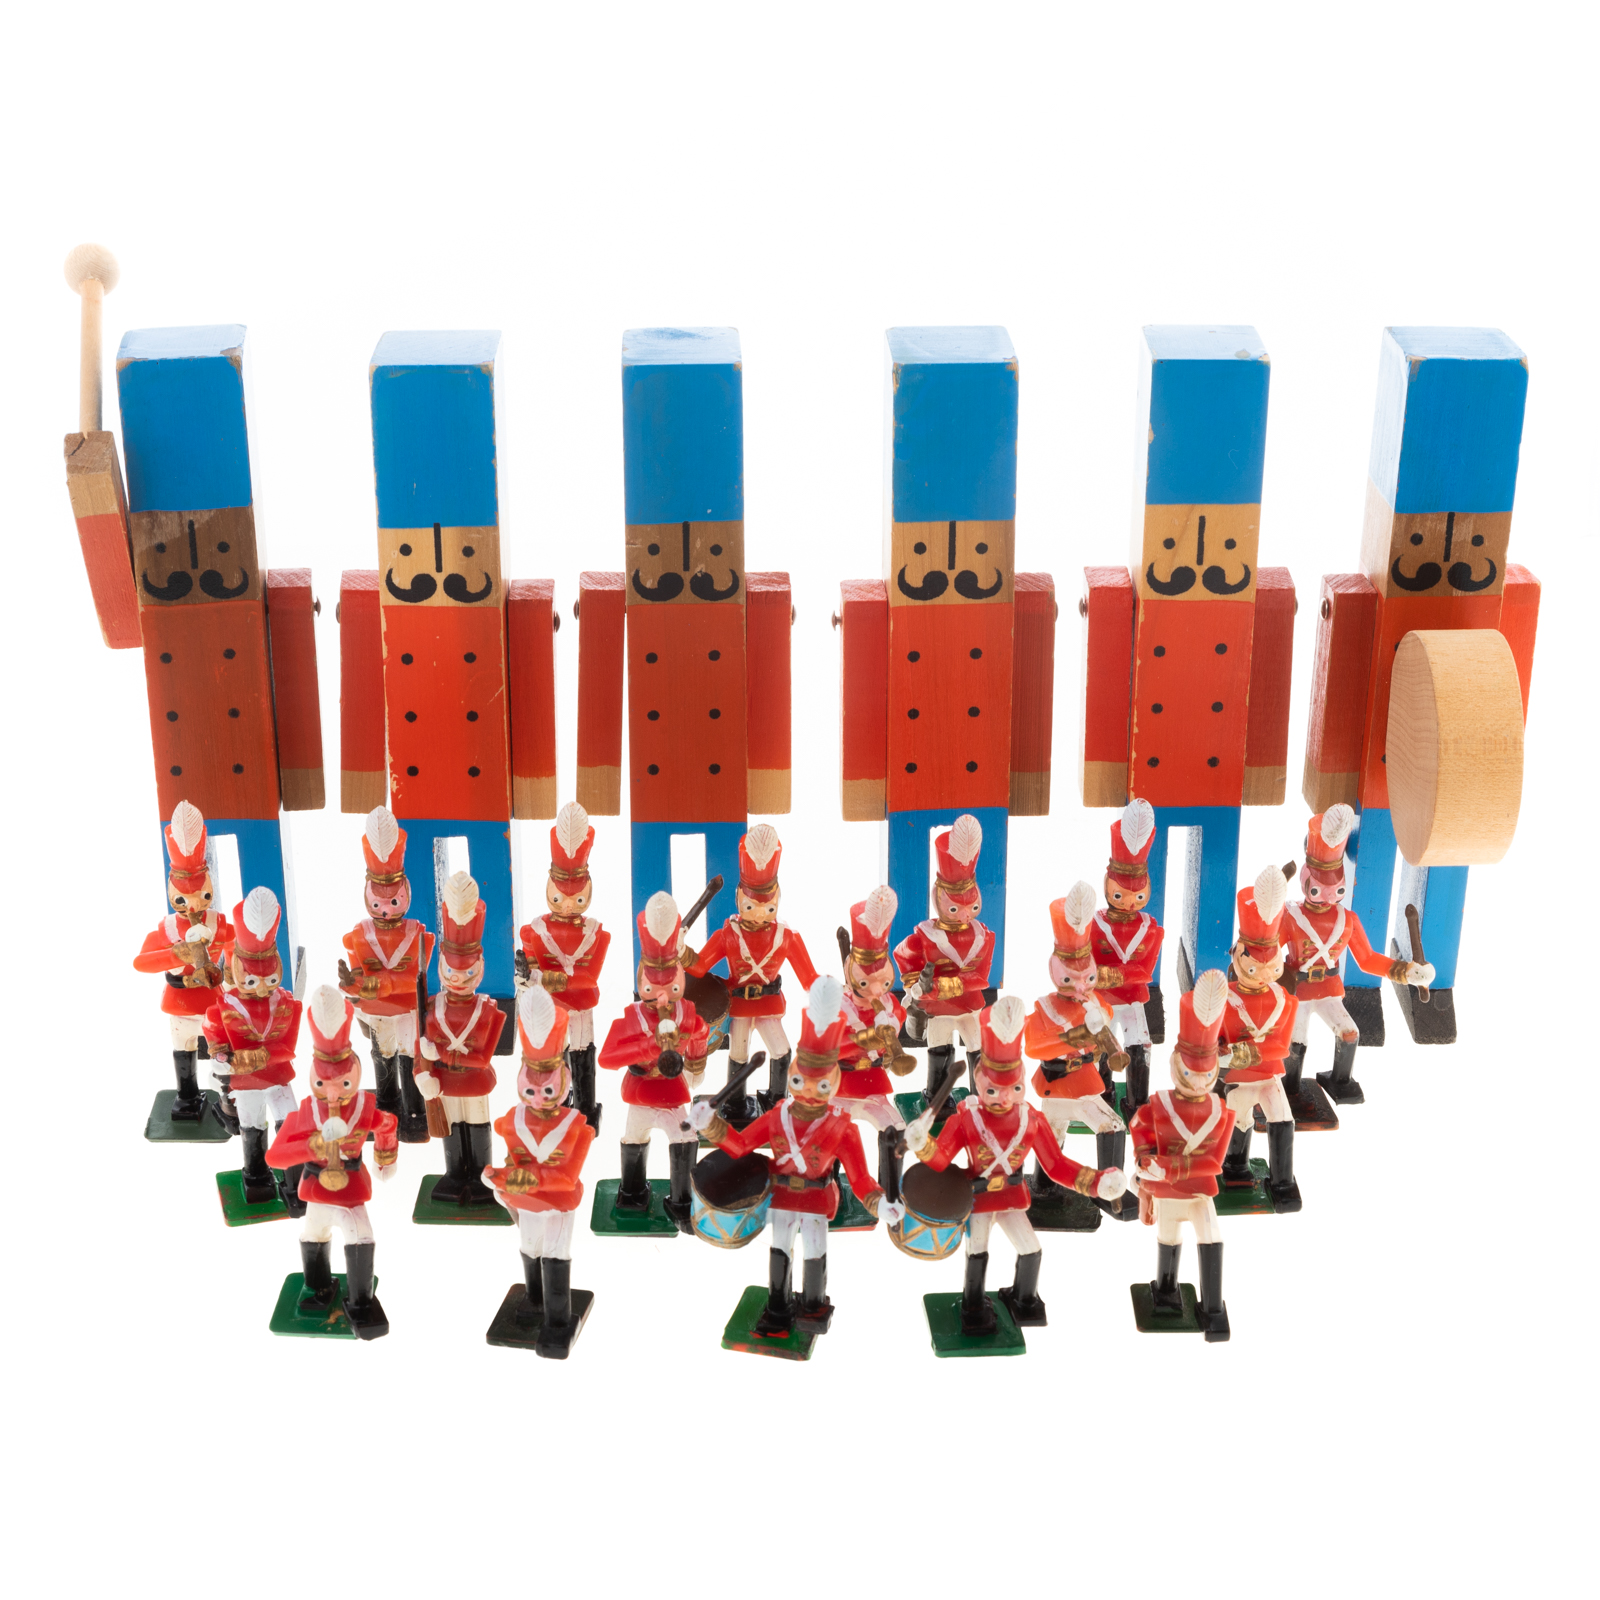 18 WILTON TOY SOLDIERS 6 WOOD 36a077